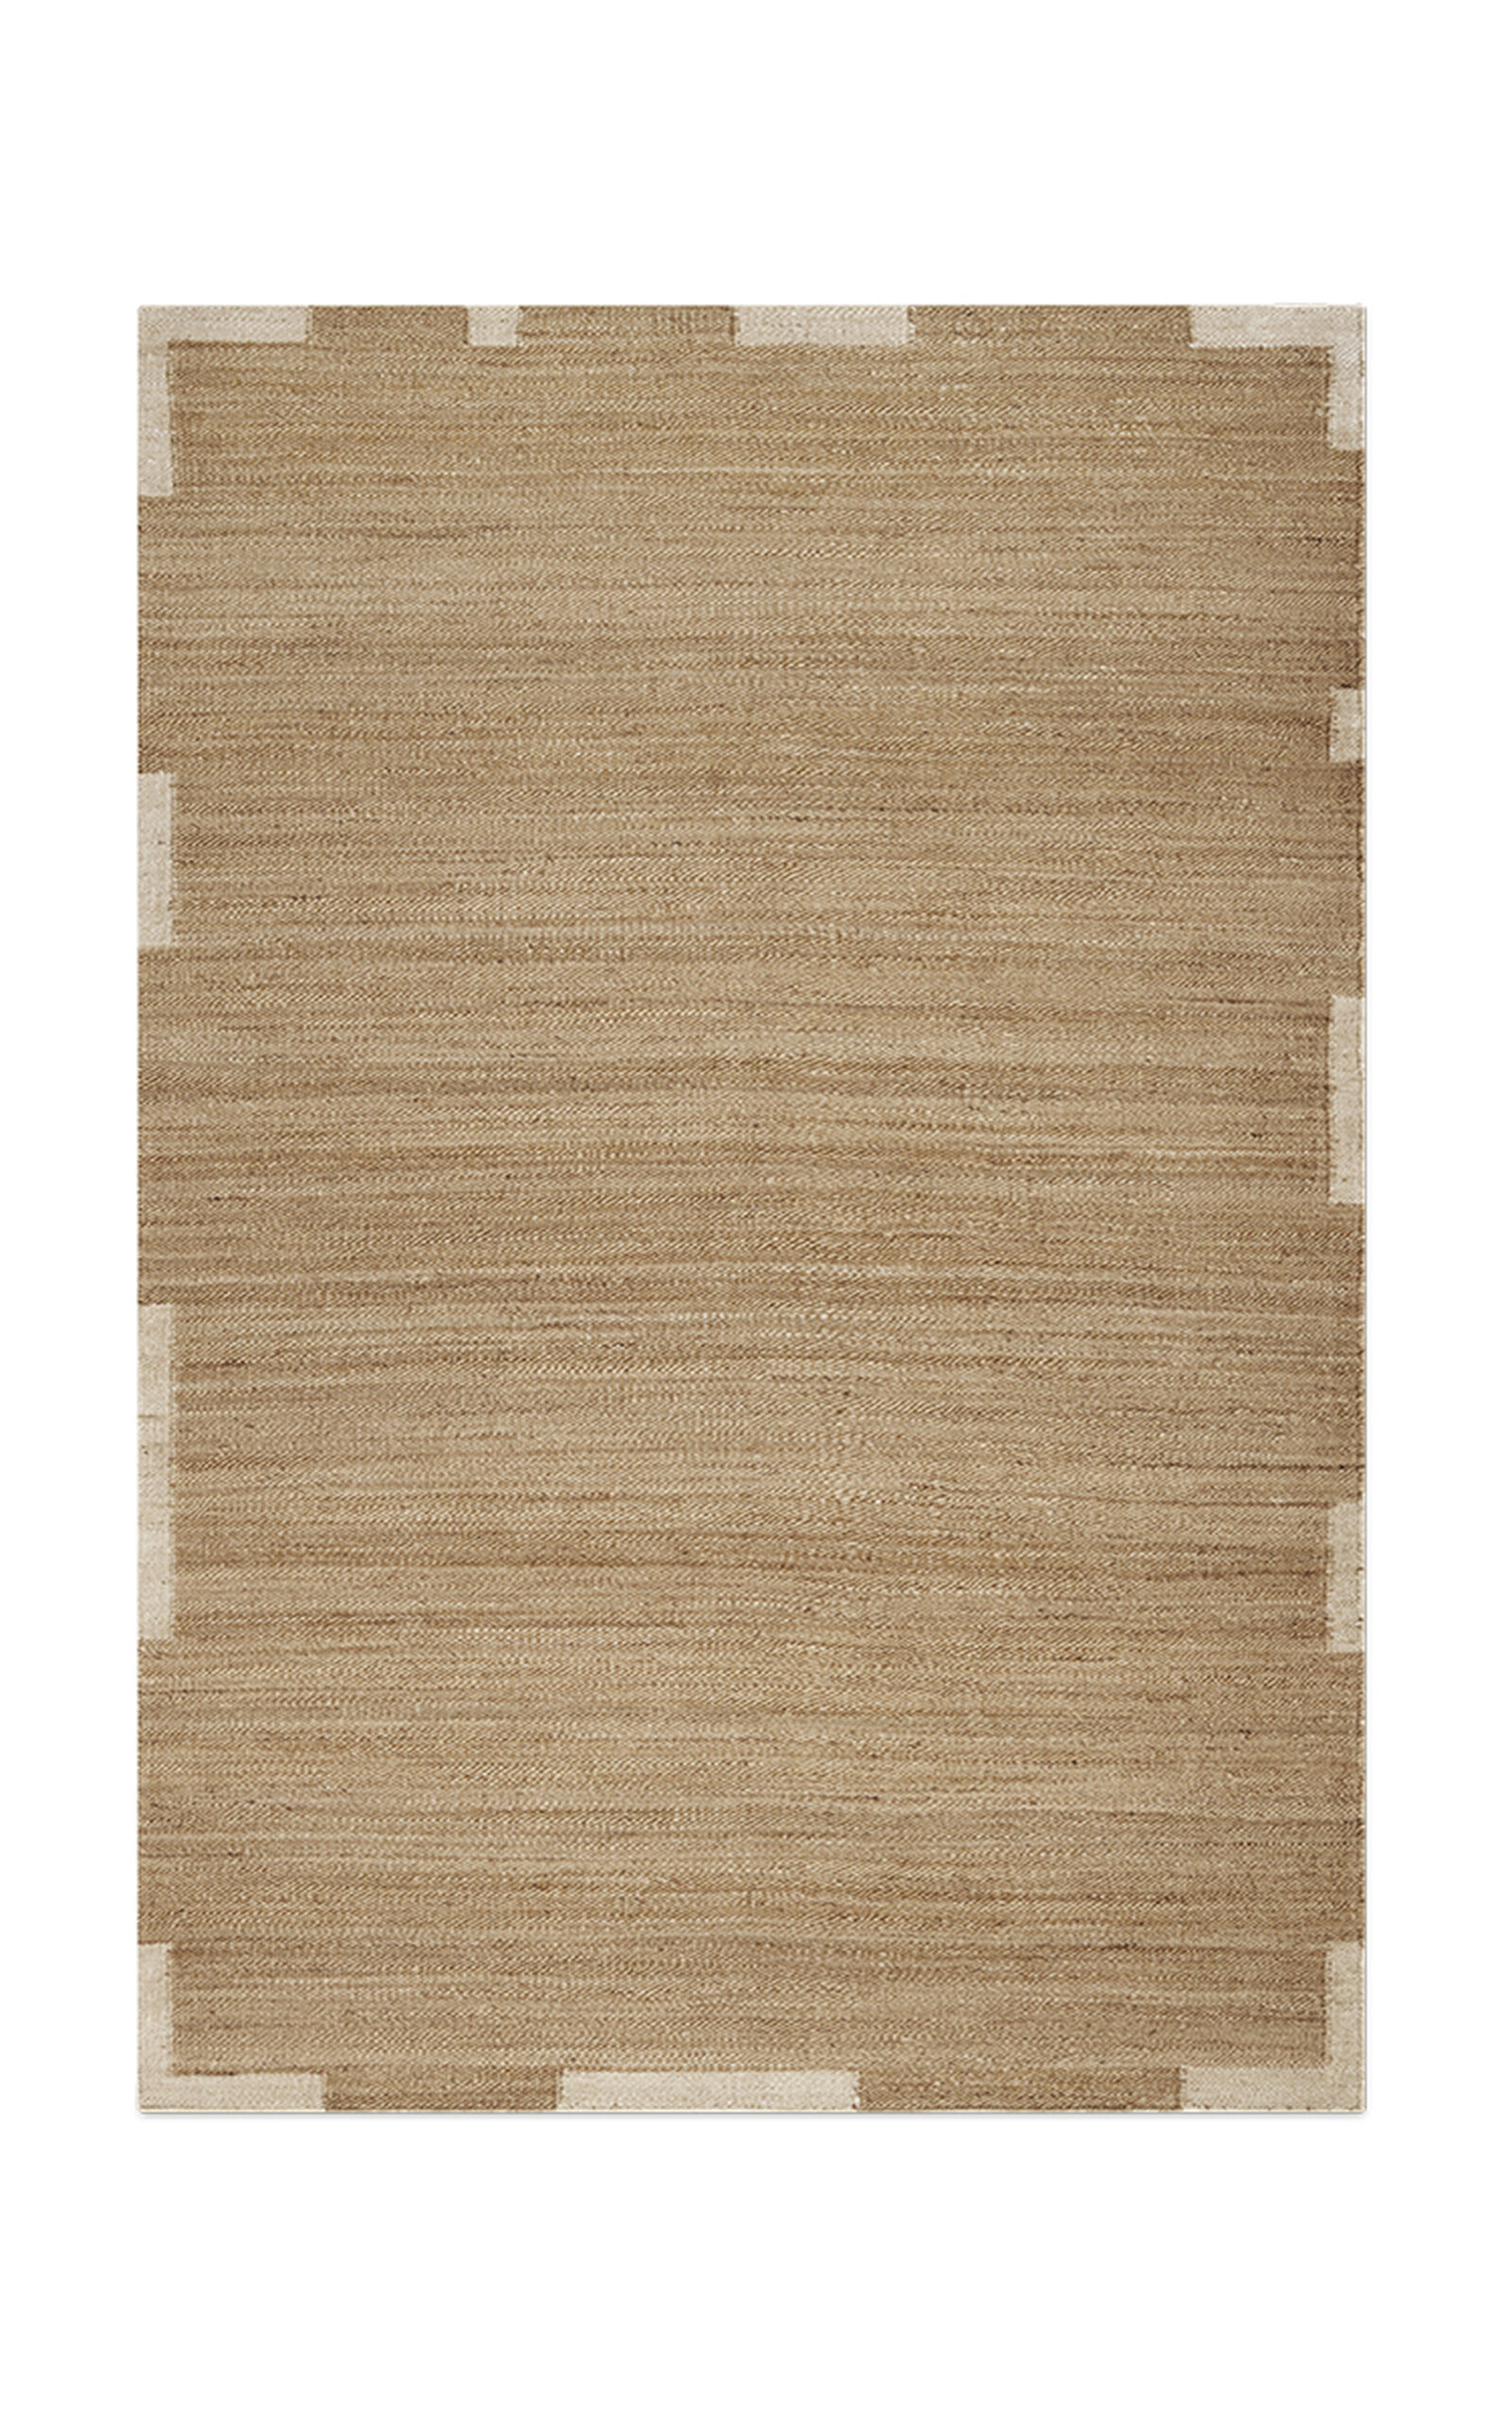 Nordic Knots Jute Edge By ; Flatweave Area Rug In Cream; Size 8' X 10' In Brown